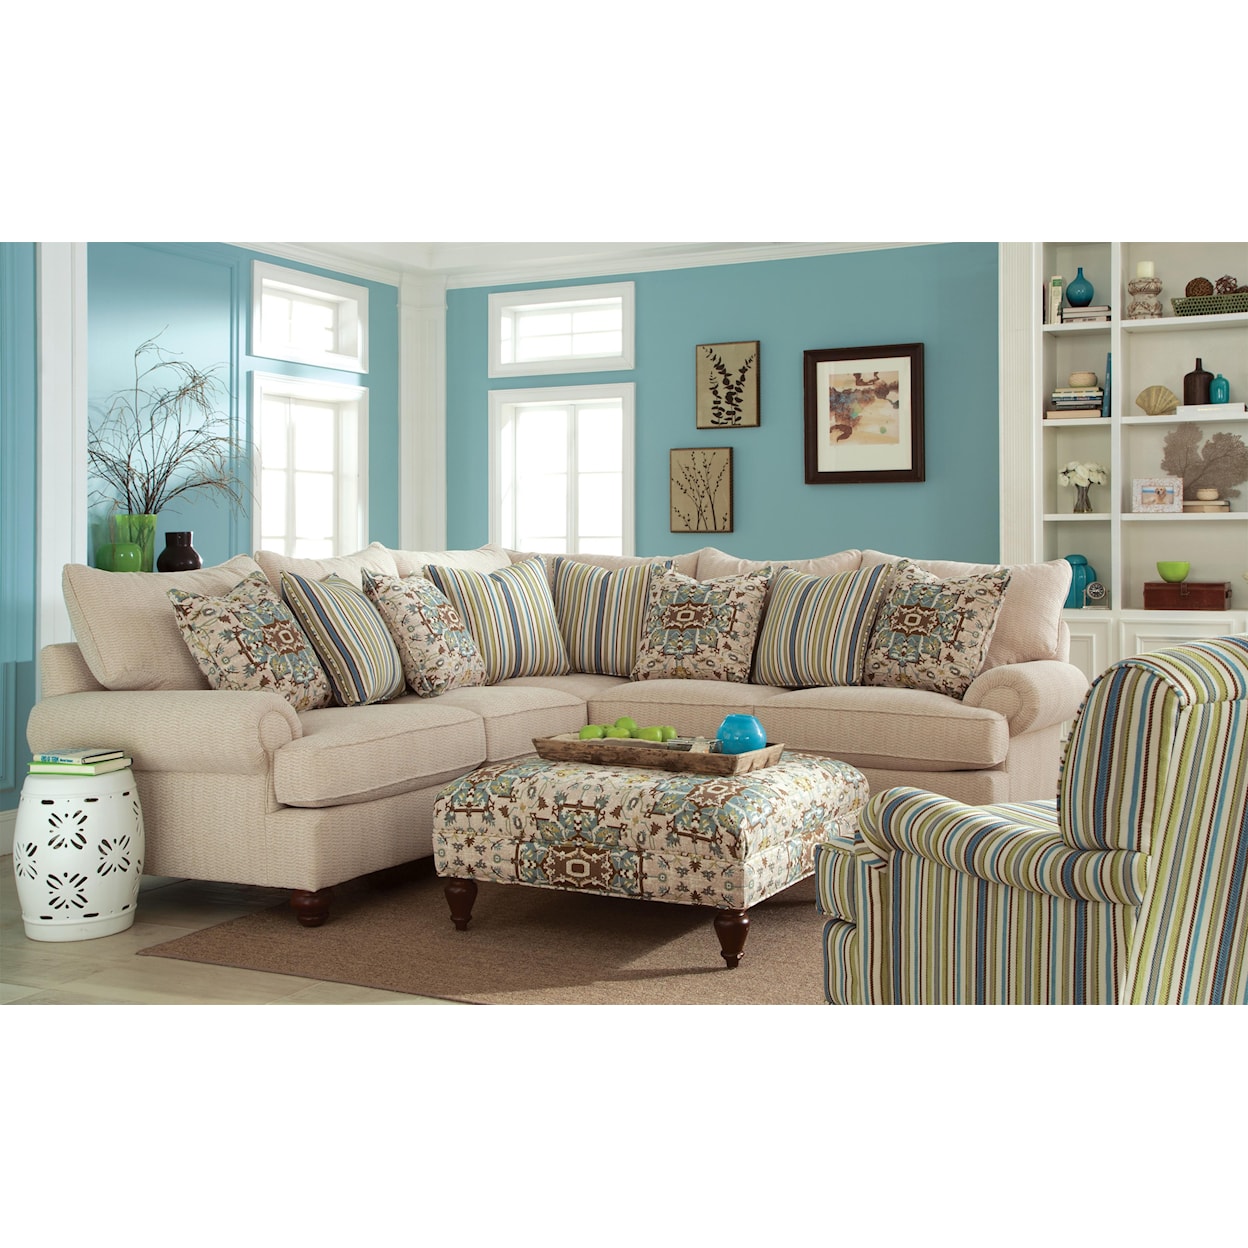 Hickory Craft 797050Pc 2 Pc Sectional Sofa